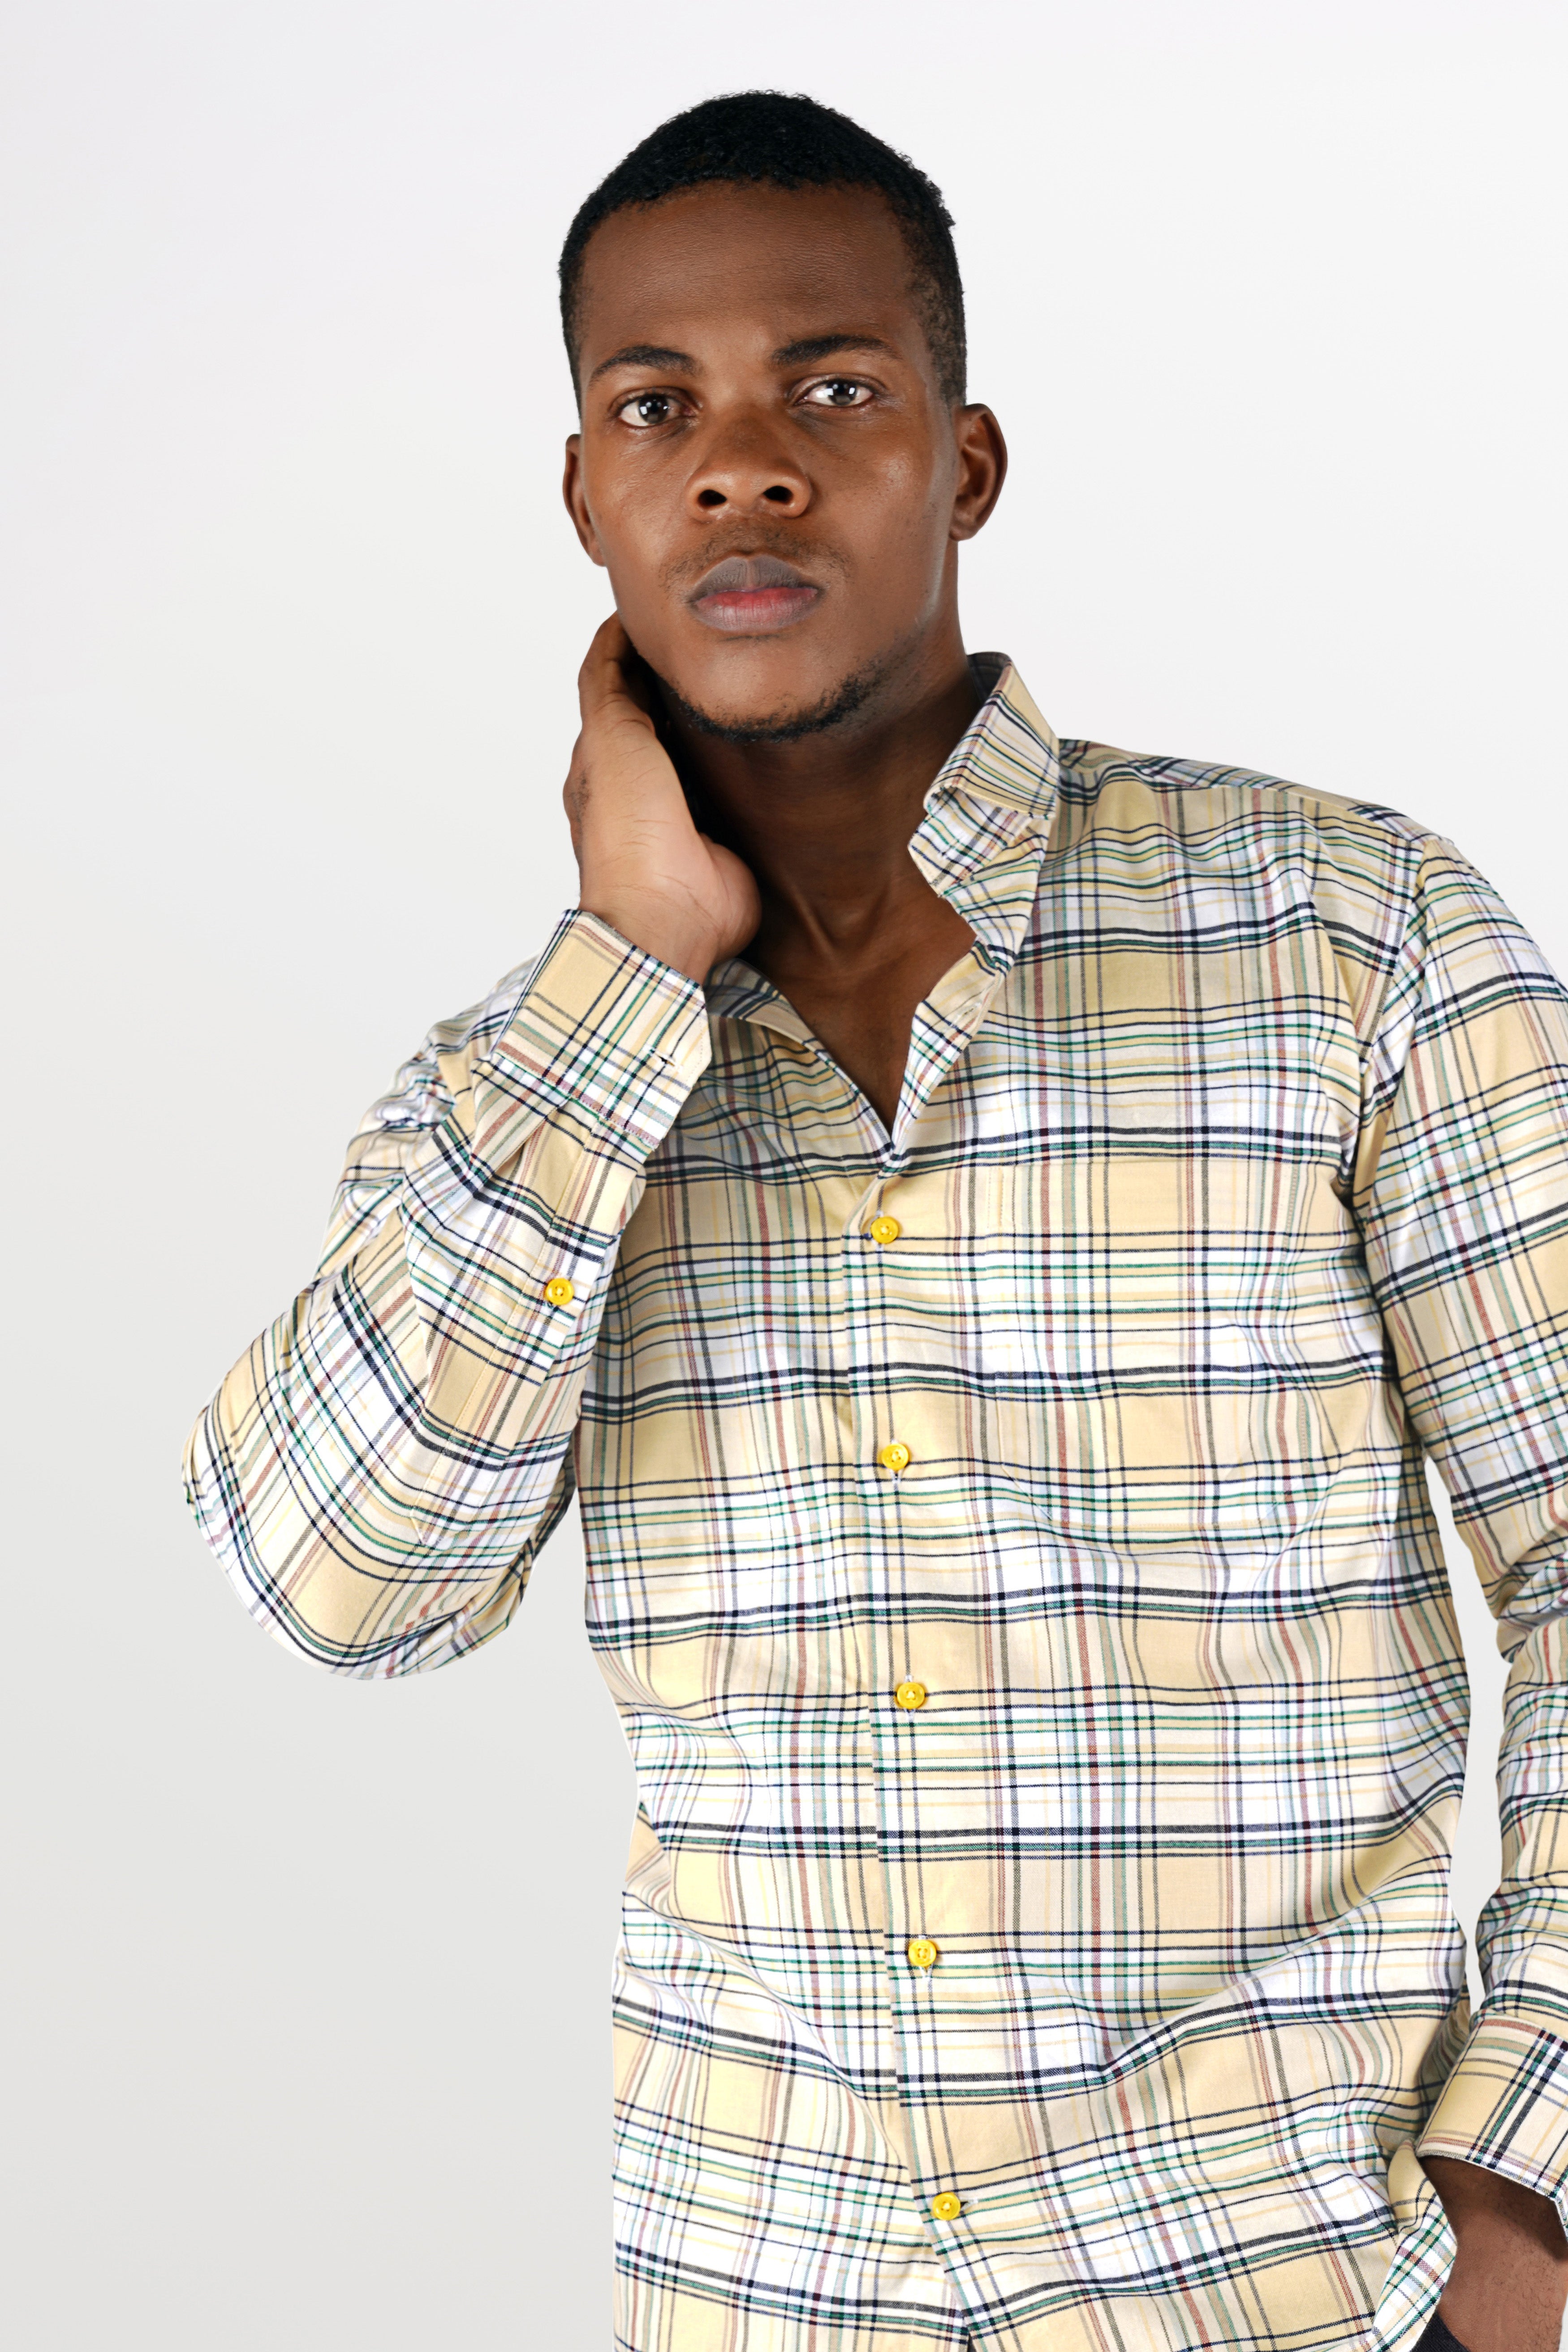 Chamois Beige with Oxley Green and Brownish Checkered Royal Oxford Shirt 10303-YL-38, 10303-YL-H-38, 10303-YL-39, 10303-YL-H-39, 10303-YL-40, 10303-YL-H-40, 10303-YL-42, 10303-YL-H-42, 10303-YL-44, 10303-YL-H-44, 10303-YL-46, 10303-YL-H-46, 10303-YL-48, 10303-YL-H-48, 10303-YL-50, 10303-YL-H-50, 10303-YL-52, 10303-YL-H-52